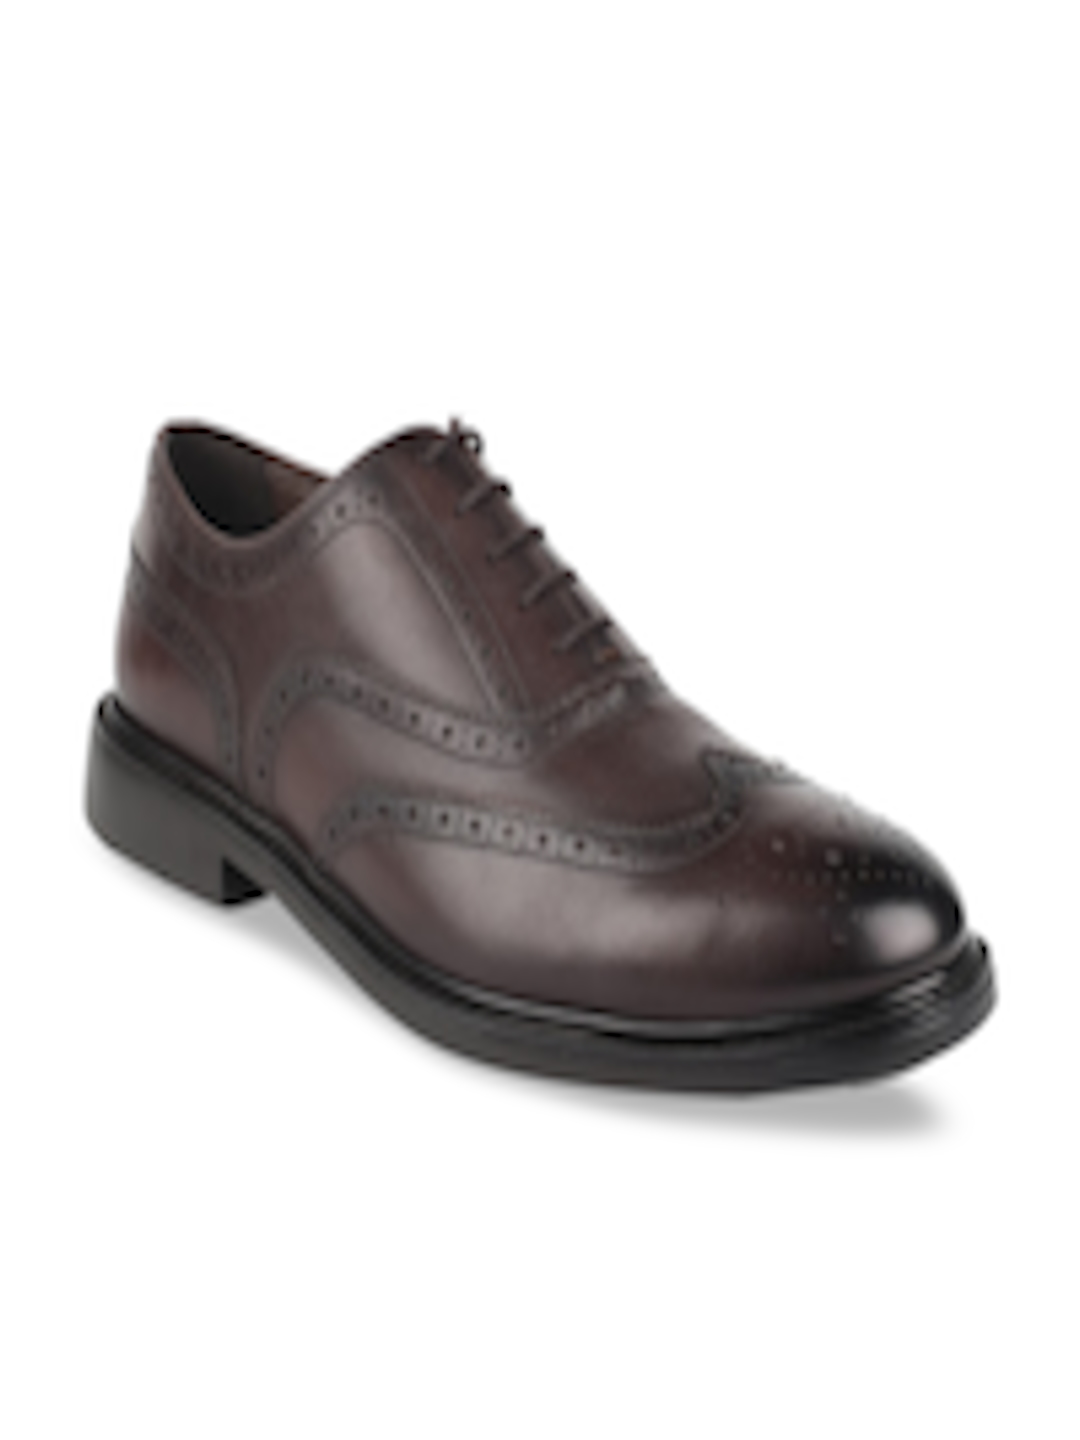 Buy Hush Puppies Men Brown Solid Formal Leather Brogues - Formal Shoes ...